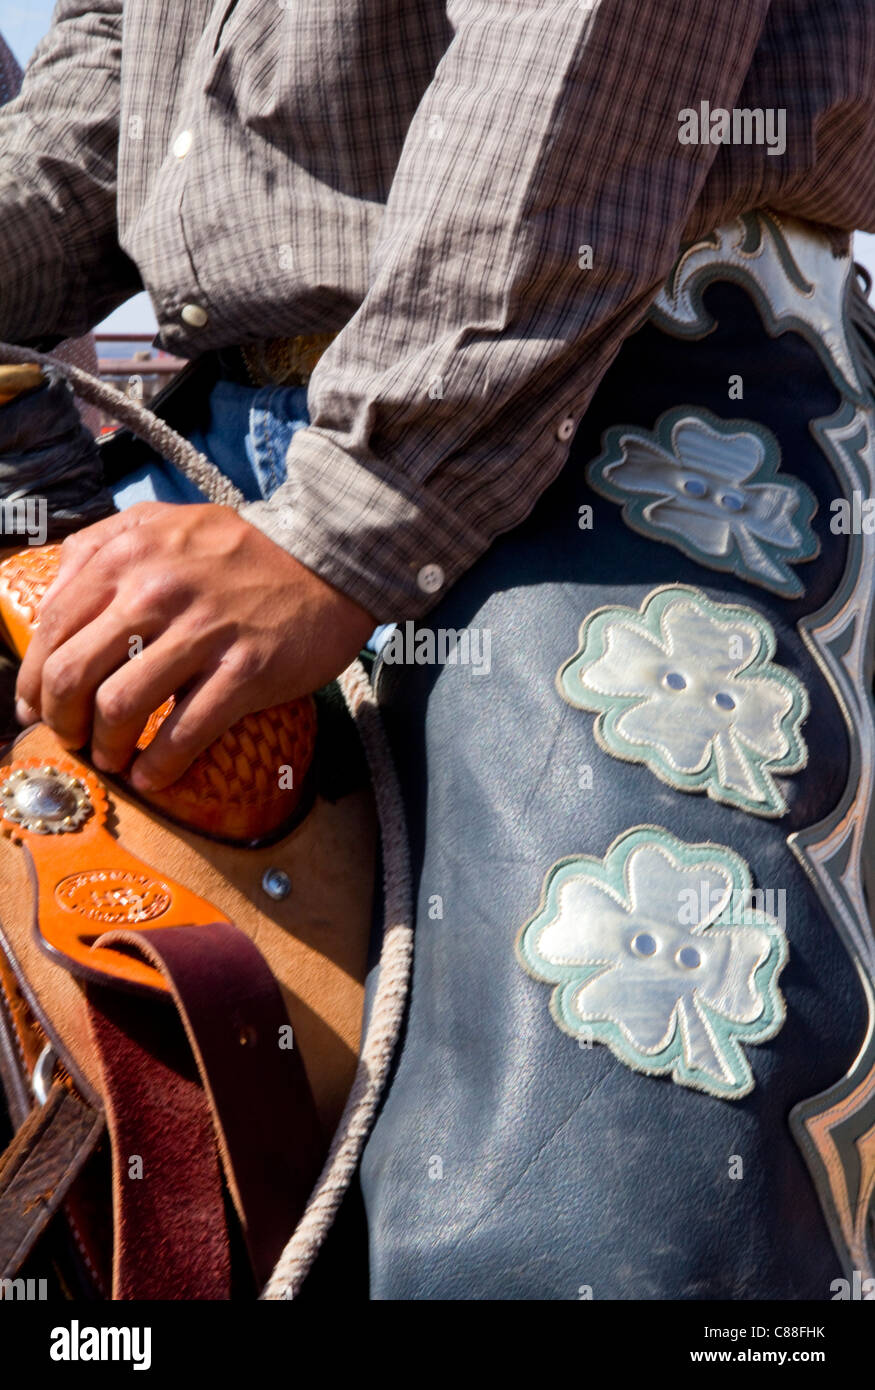 Cowboy close-up at the annual Labor Day weekend Carrizozo Cowboy Days rodeo, Carrizozo, NM. Stock Photo